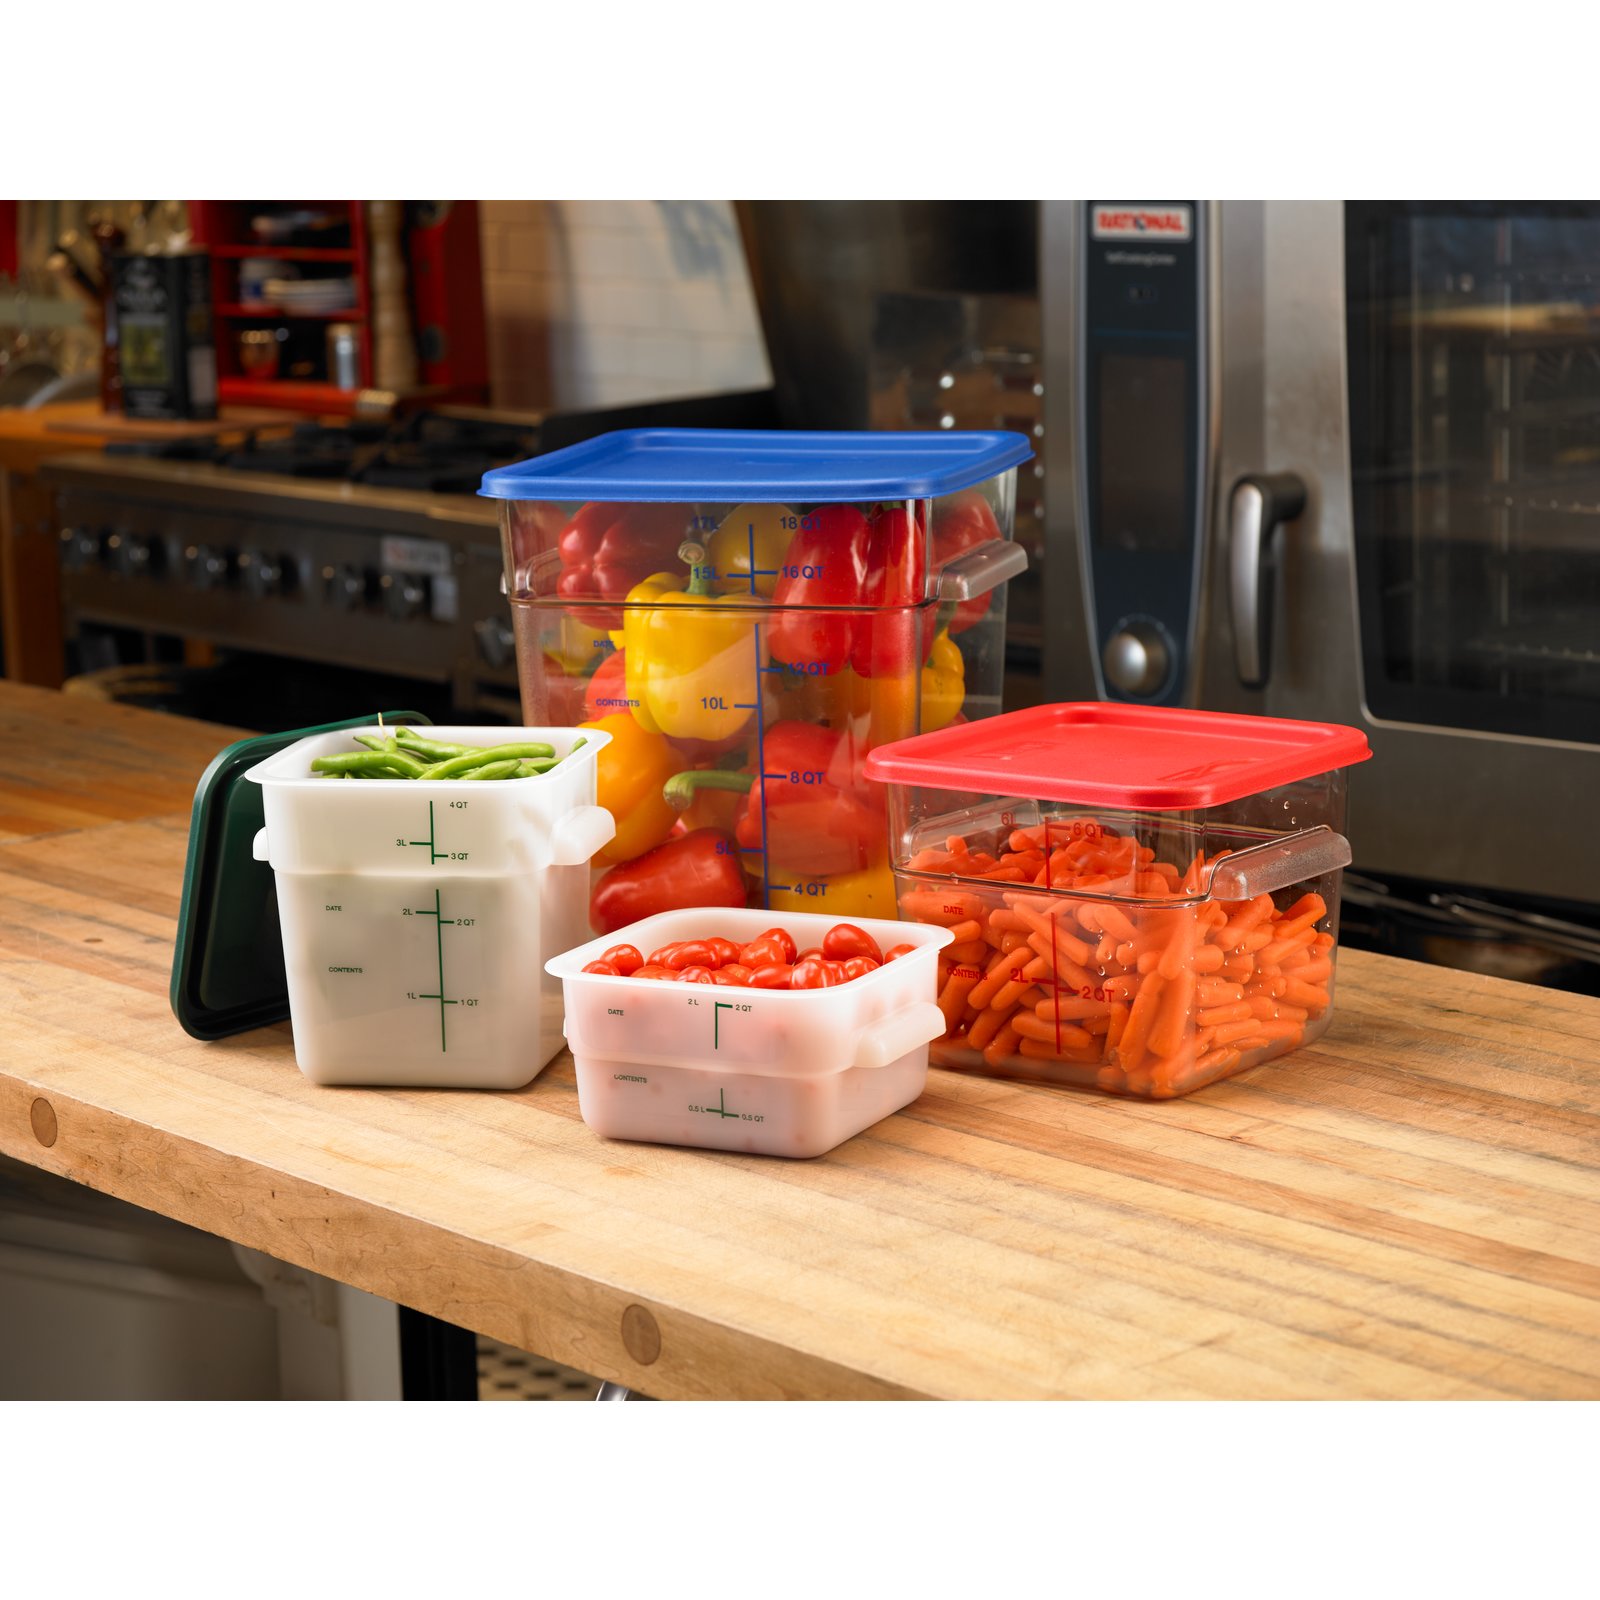 1195307 - Squares Polycarbonate Food Storage Container 8 qt - Clear